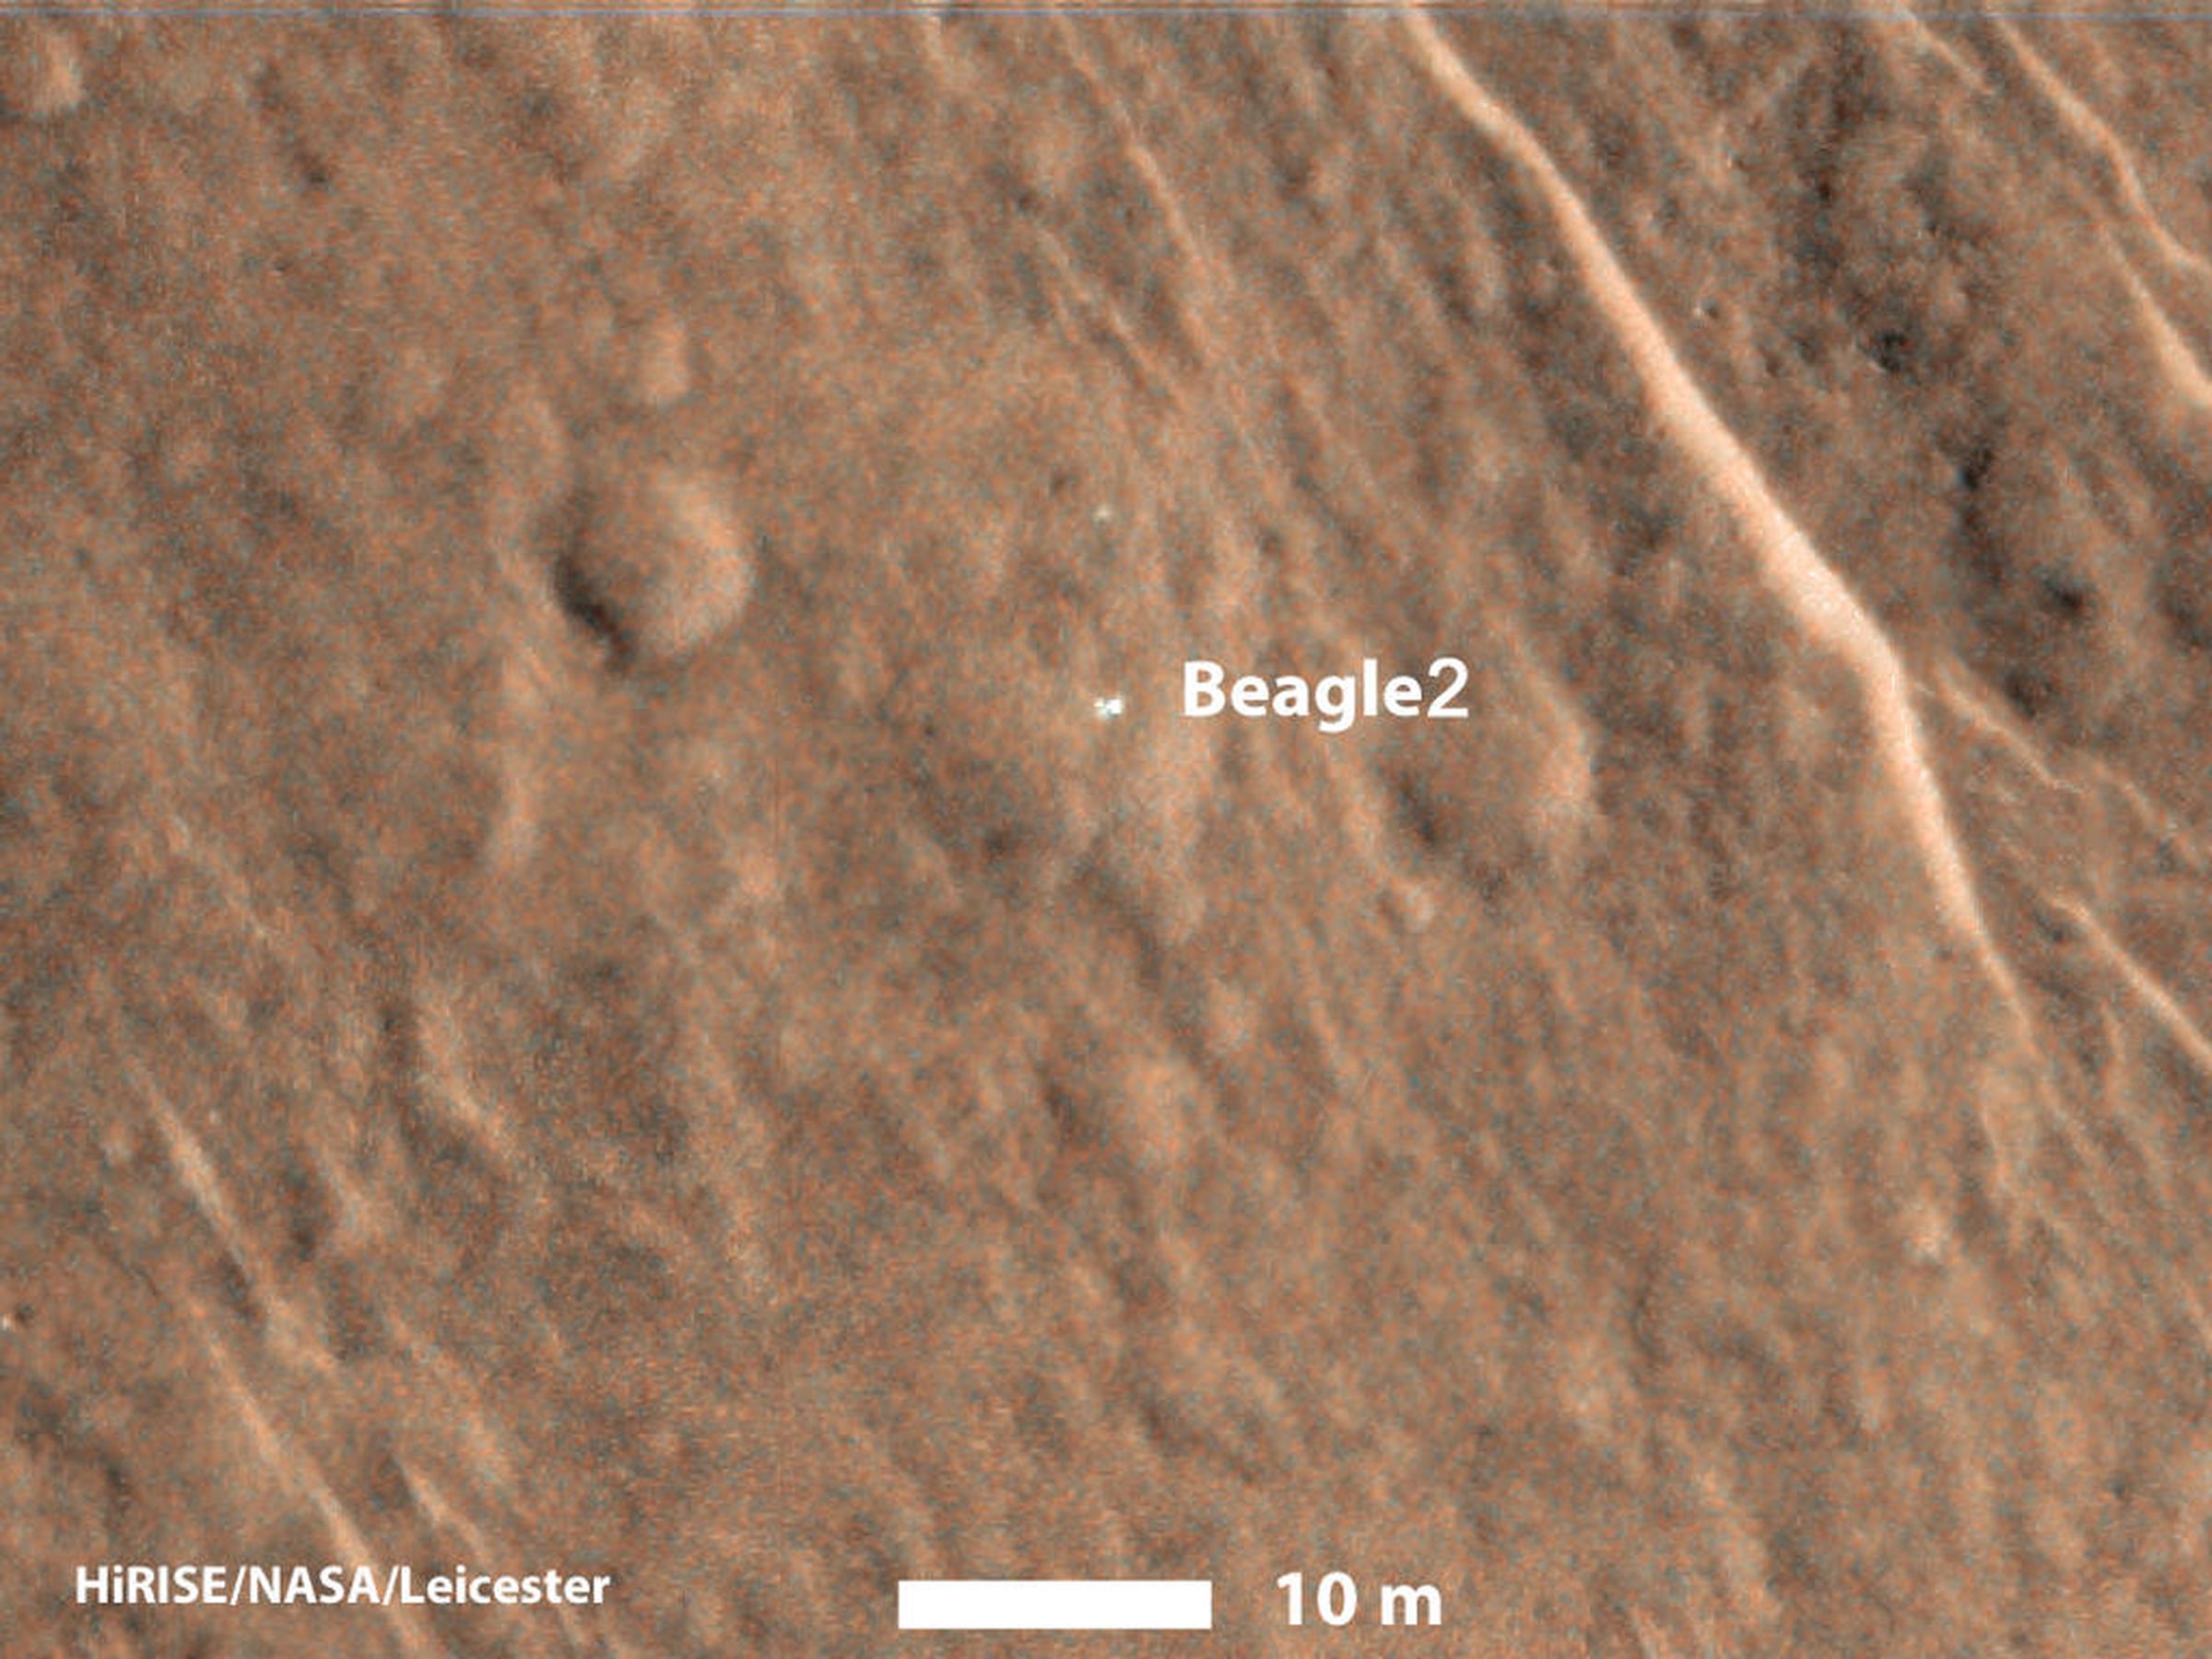 Beagle 2 found 12 years after disappearing on Mars